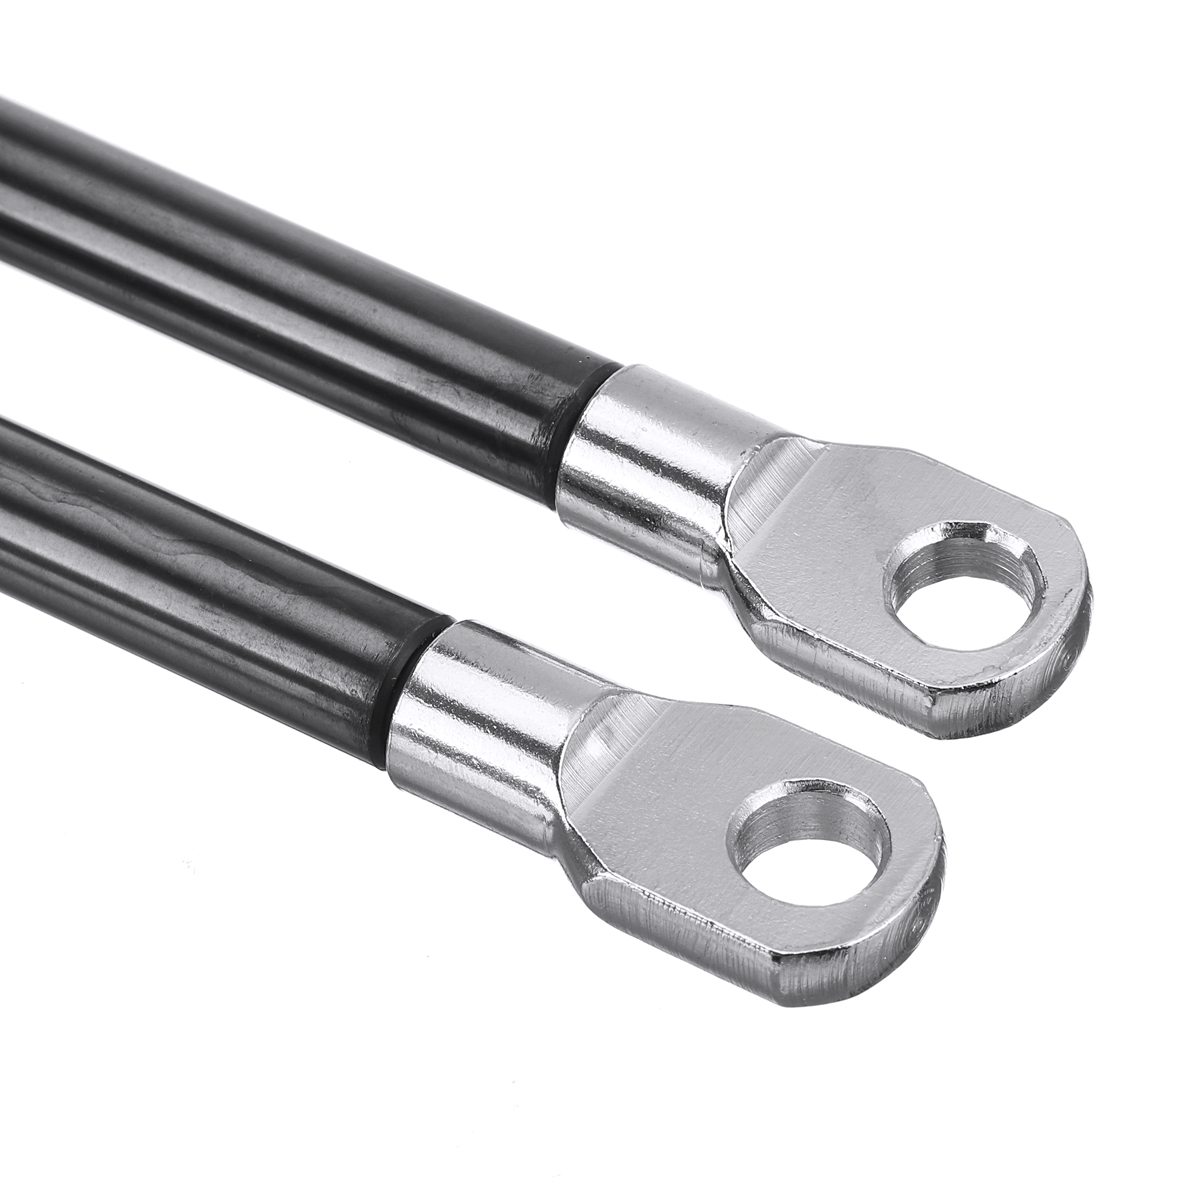 2Pcs-310-810mm-Extended-100-350-Compressed-Universal-800N-Force-Gas-Springs-Struts-Lifters-Supports--1777718-13